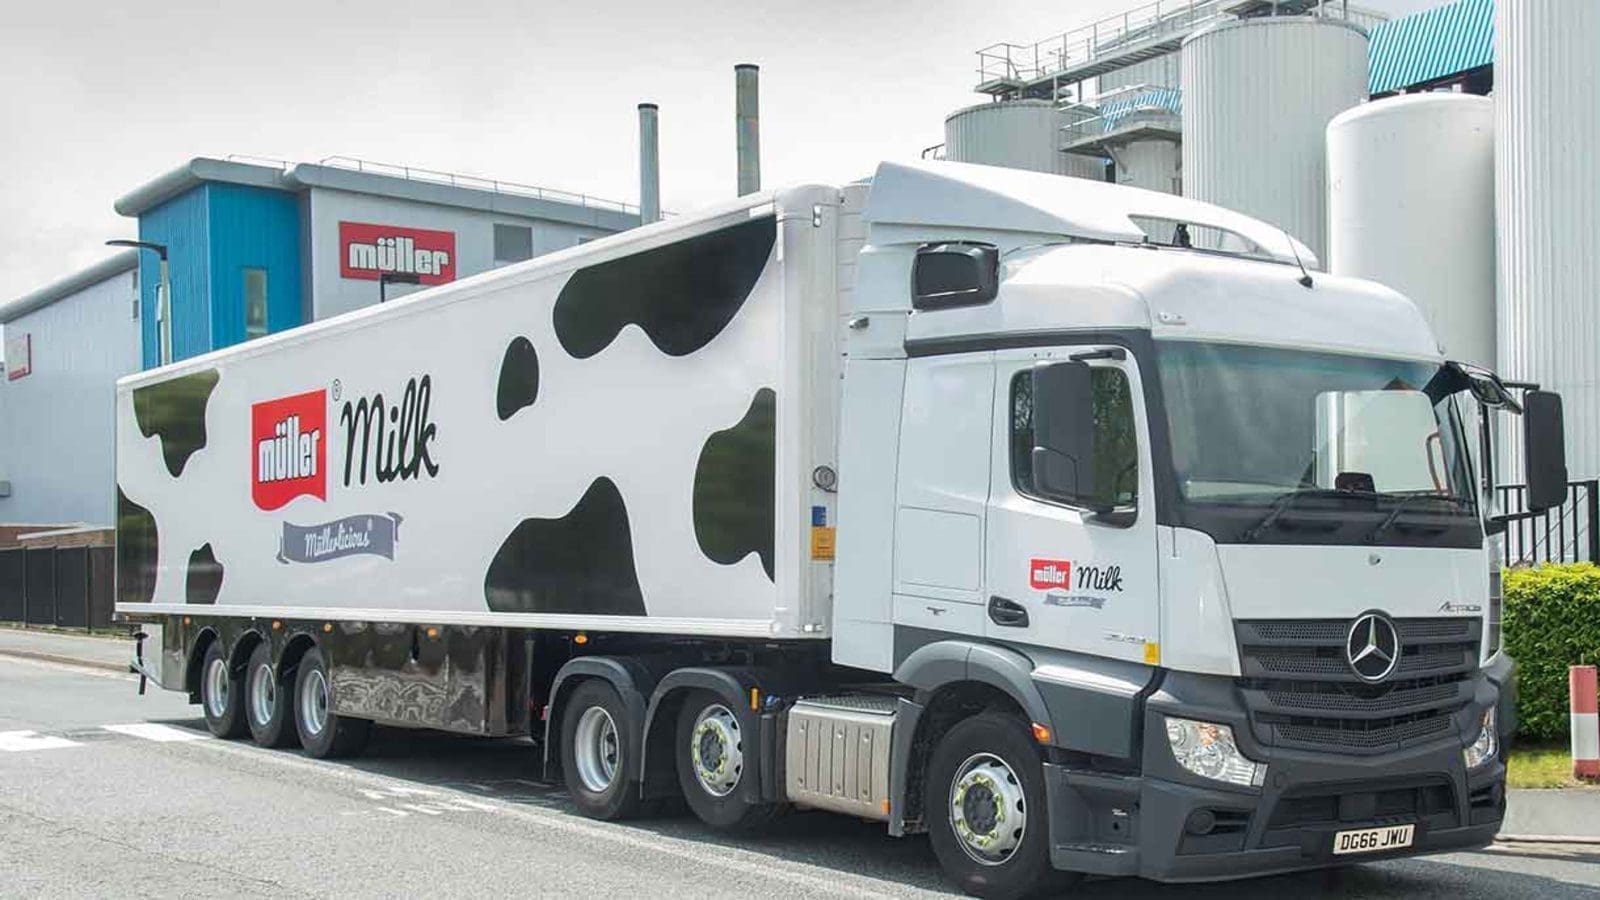 Müller to strengthen UK operations with new investments in 2 existing dairy plants